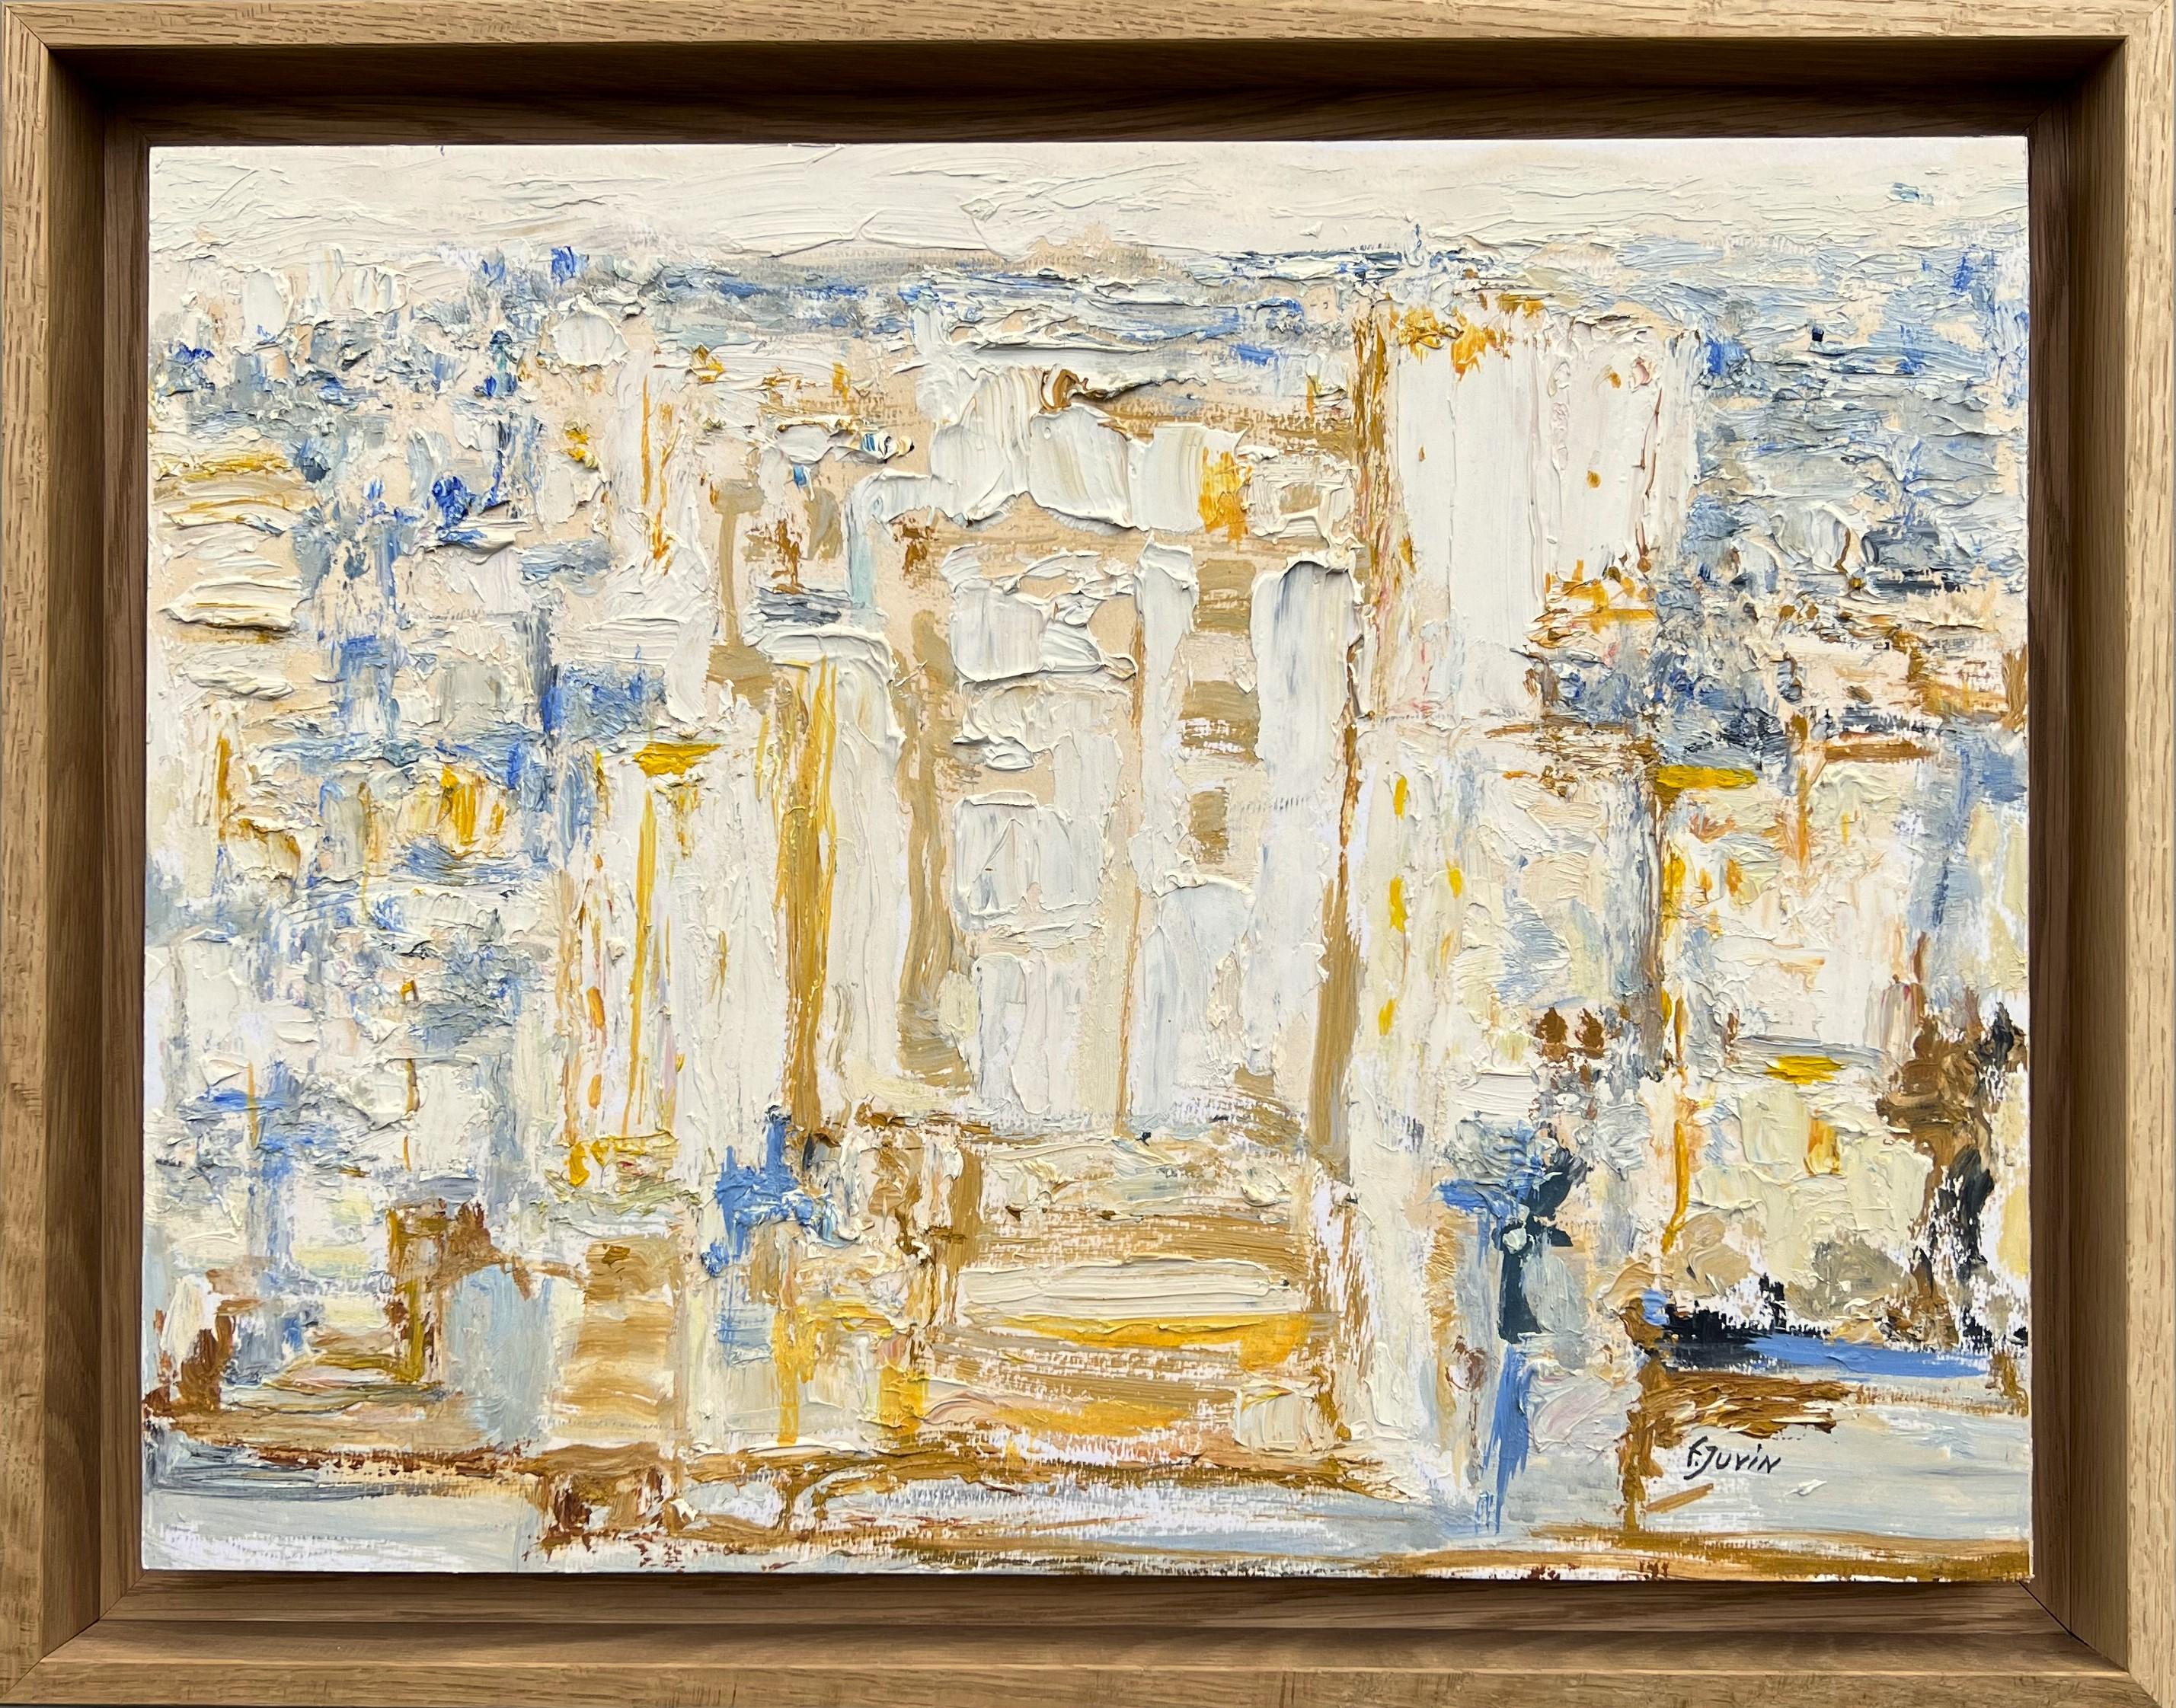 View of Paris with buildings, oil painting by Françoise Juvin